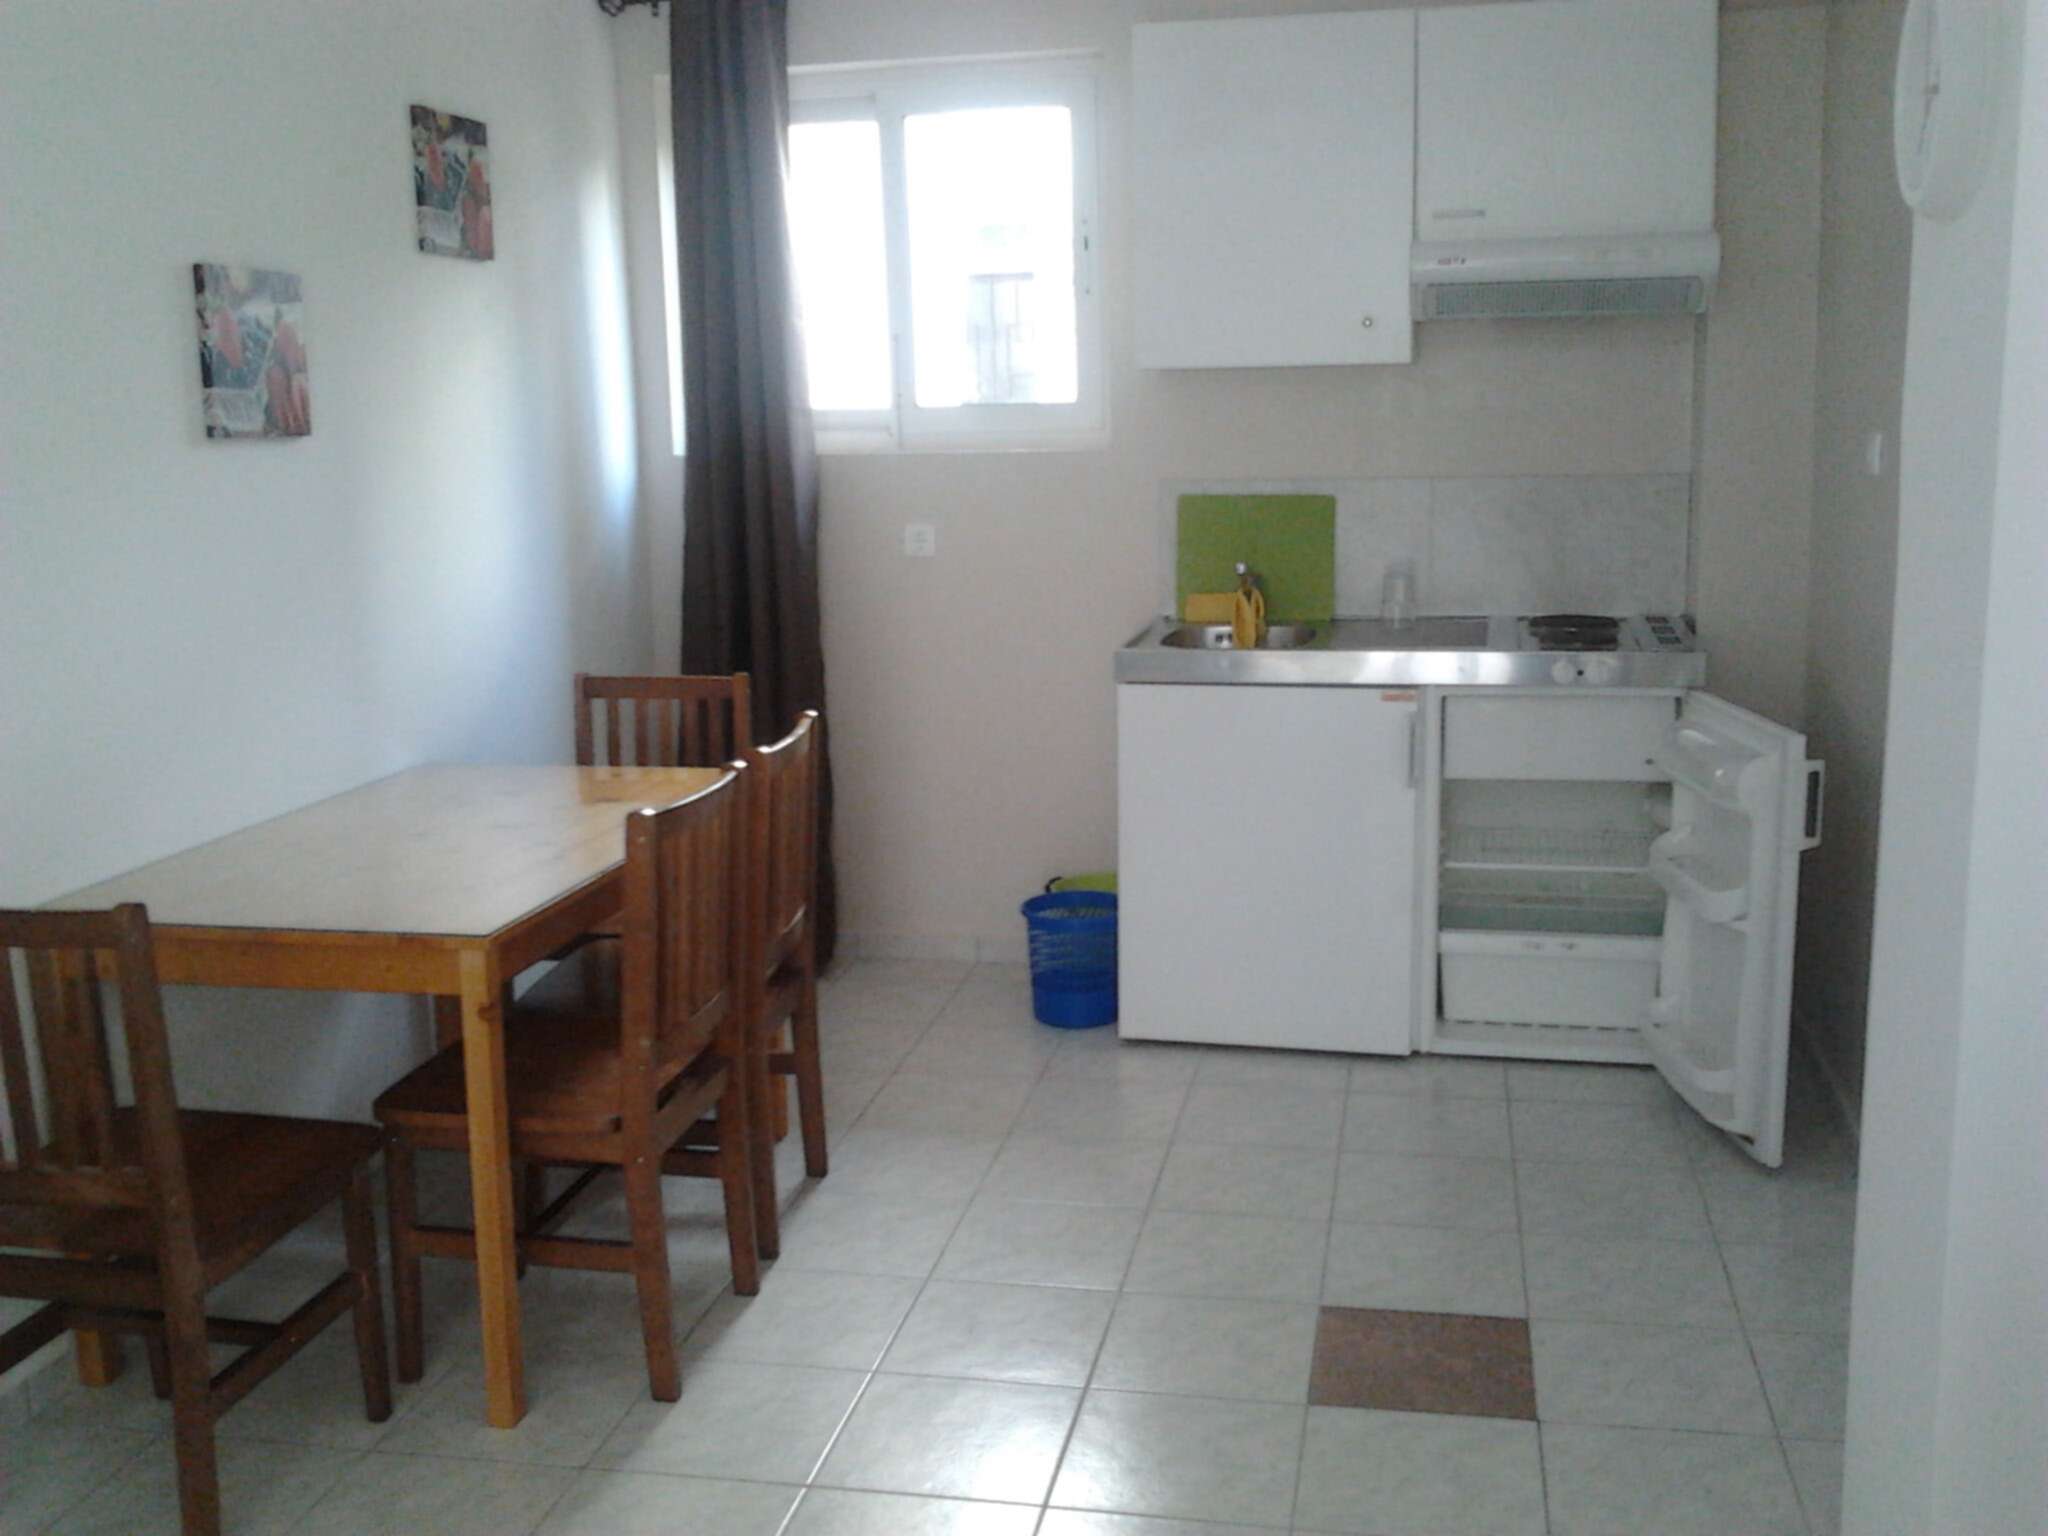 Rent Furnished Apartments Athens 35 Euro Embio Medical Center